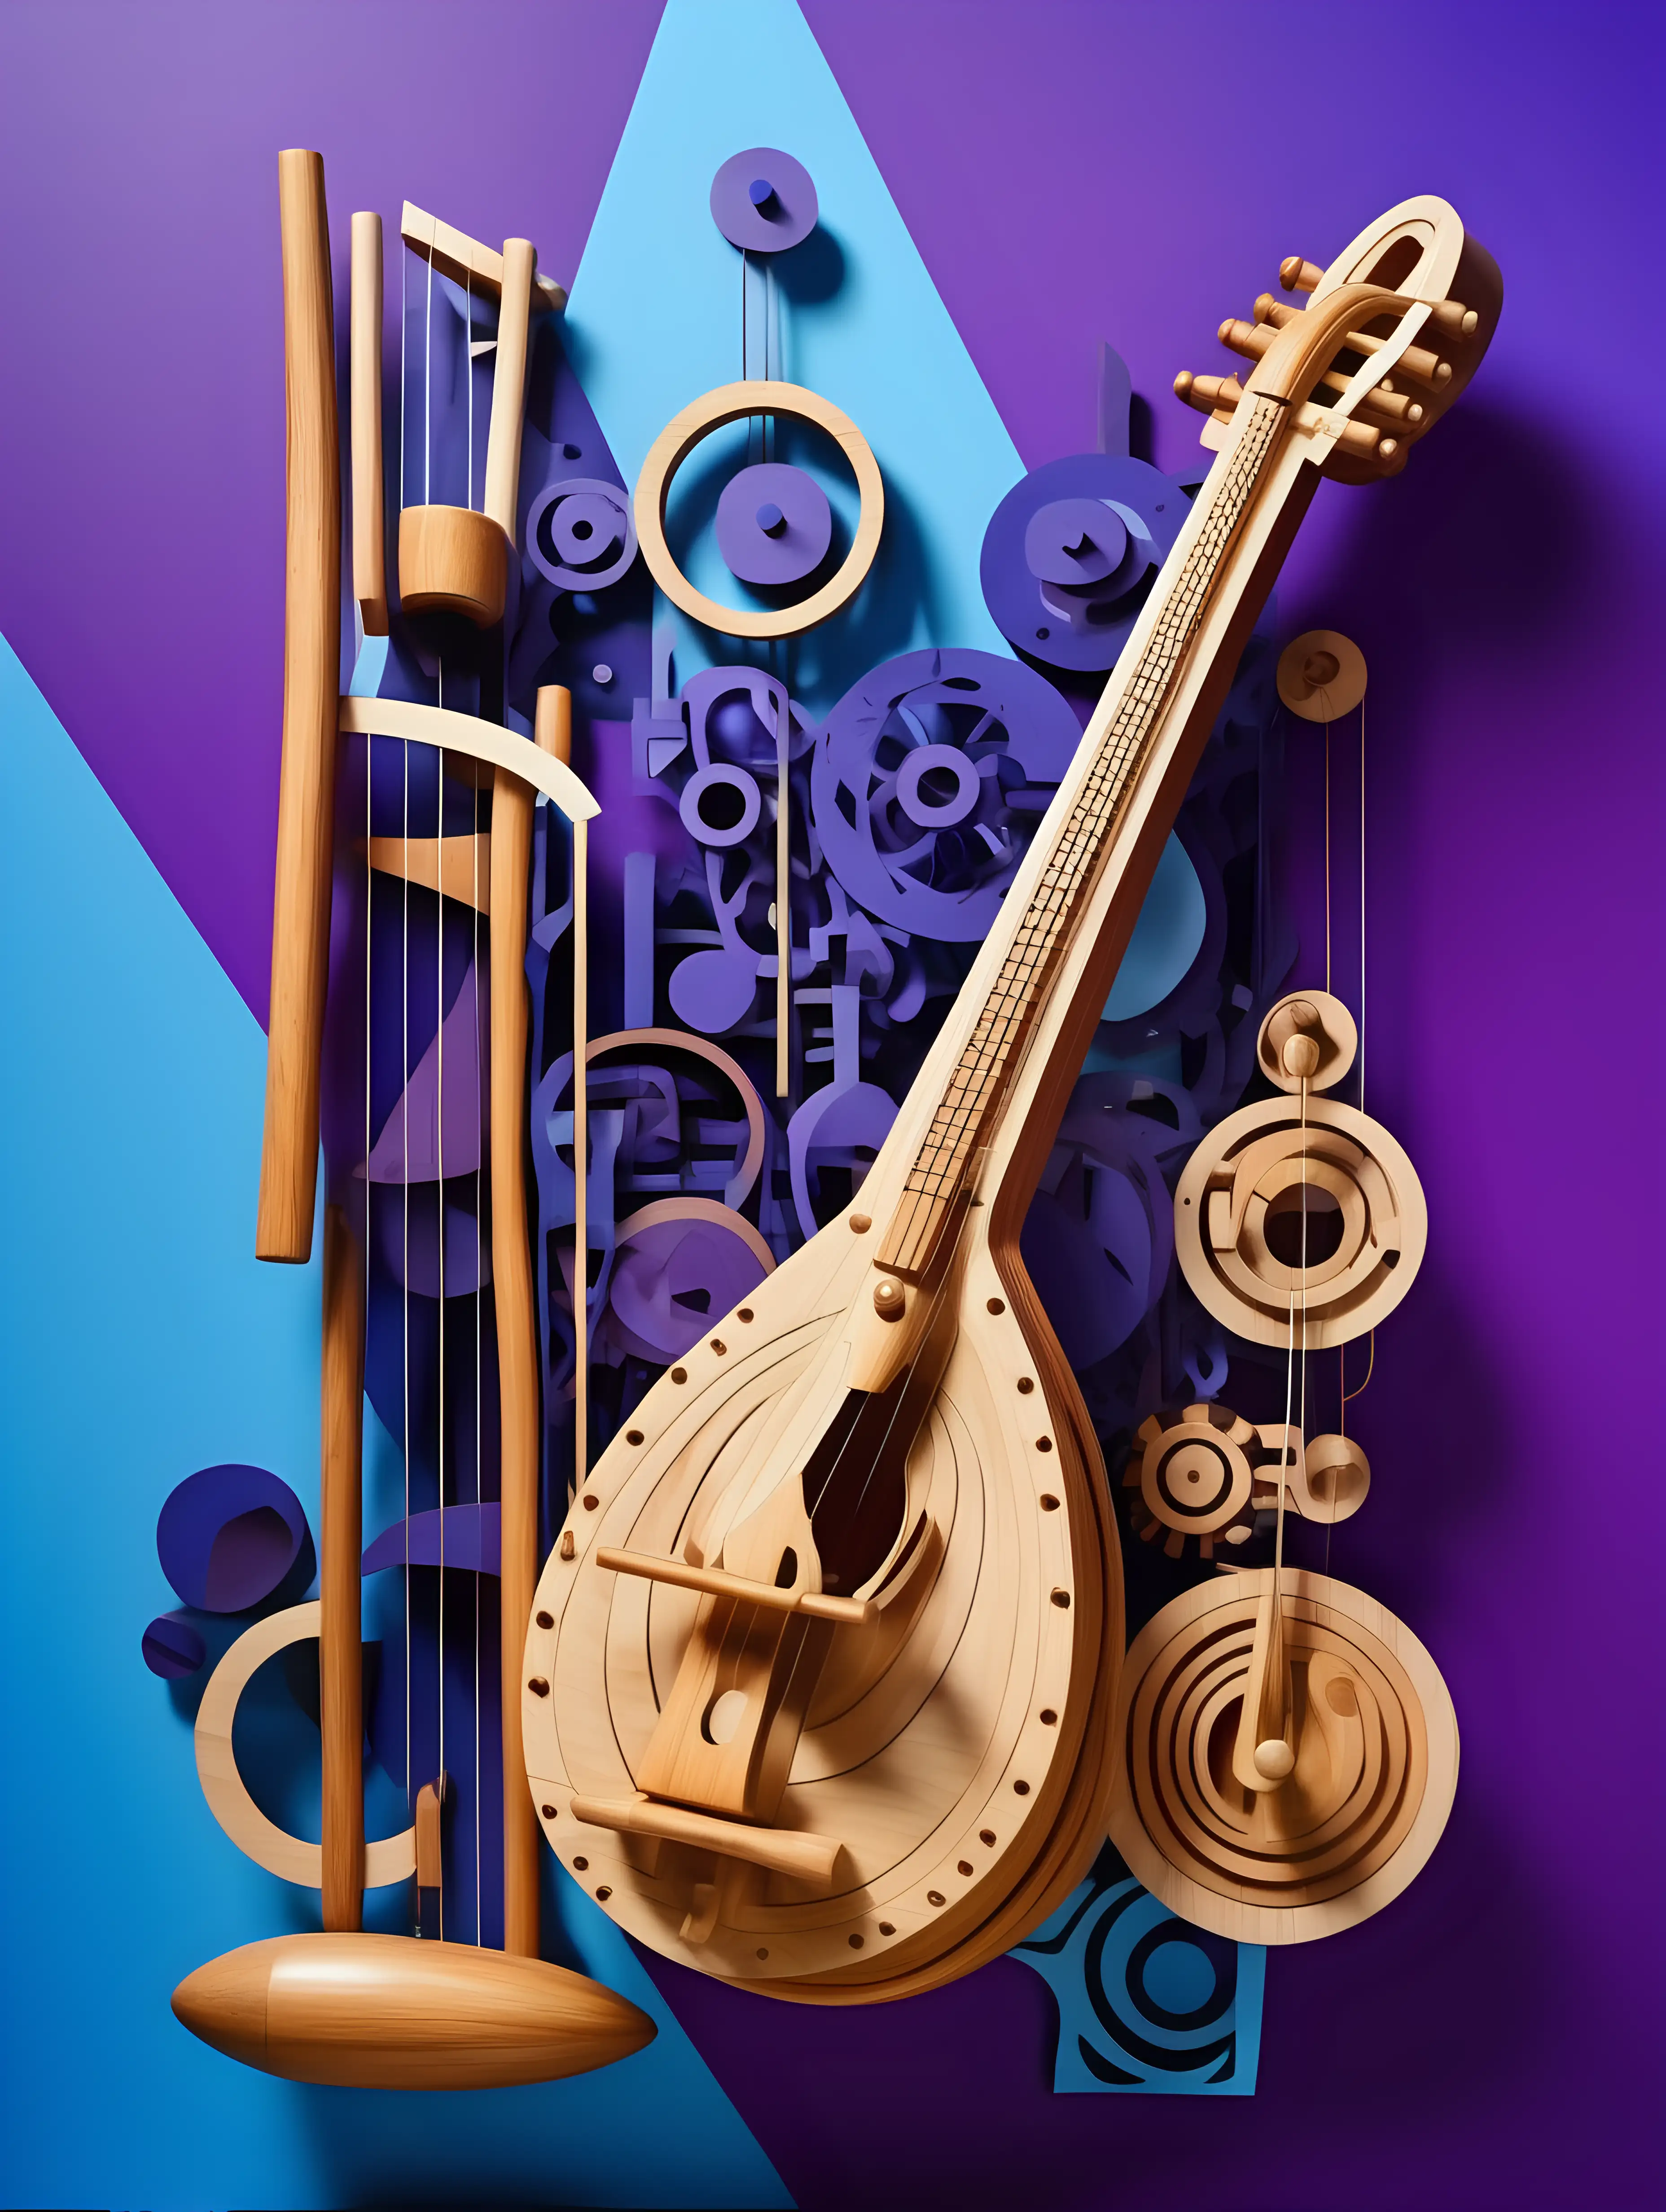 organic and mechanical art with wood musical instrument, in a geometric and abstract shapes purple blue background